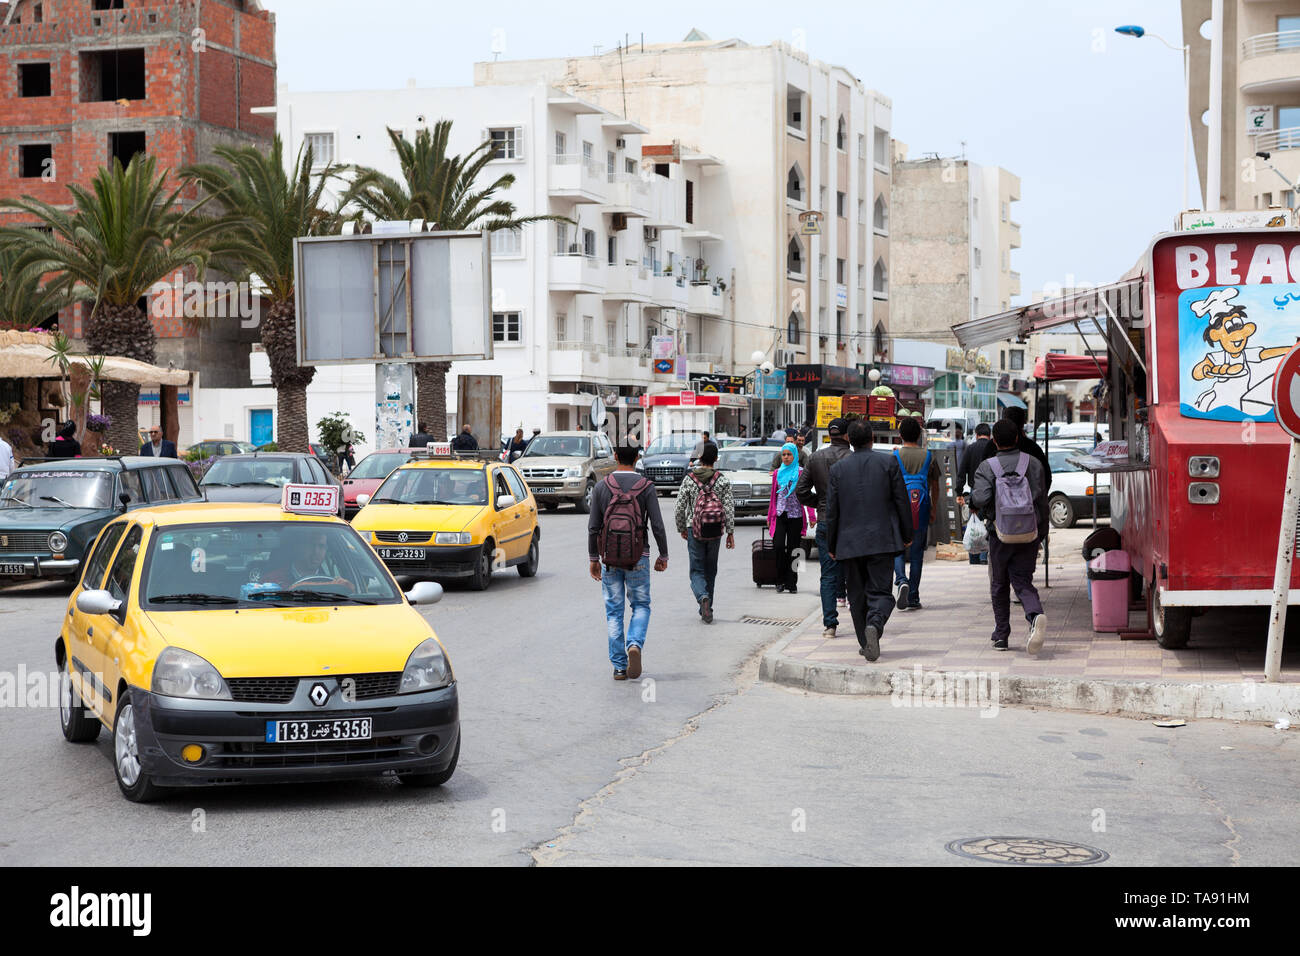 City landscape with cars and residents of a small town. Tunisia, Africa Stock Photo